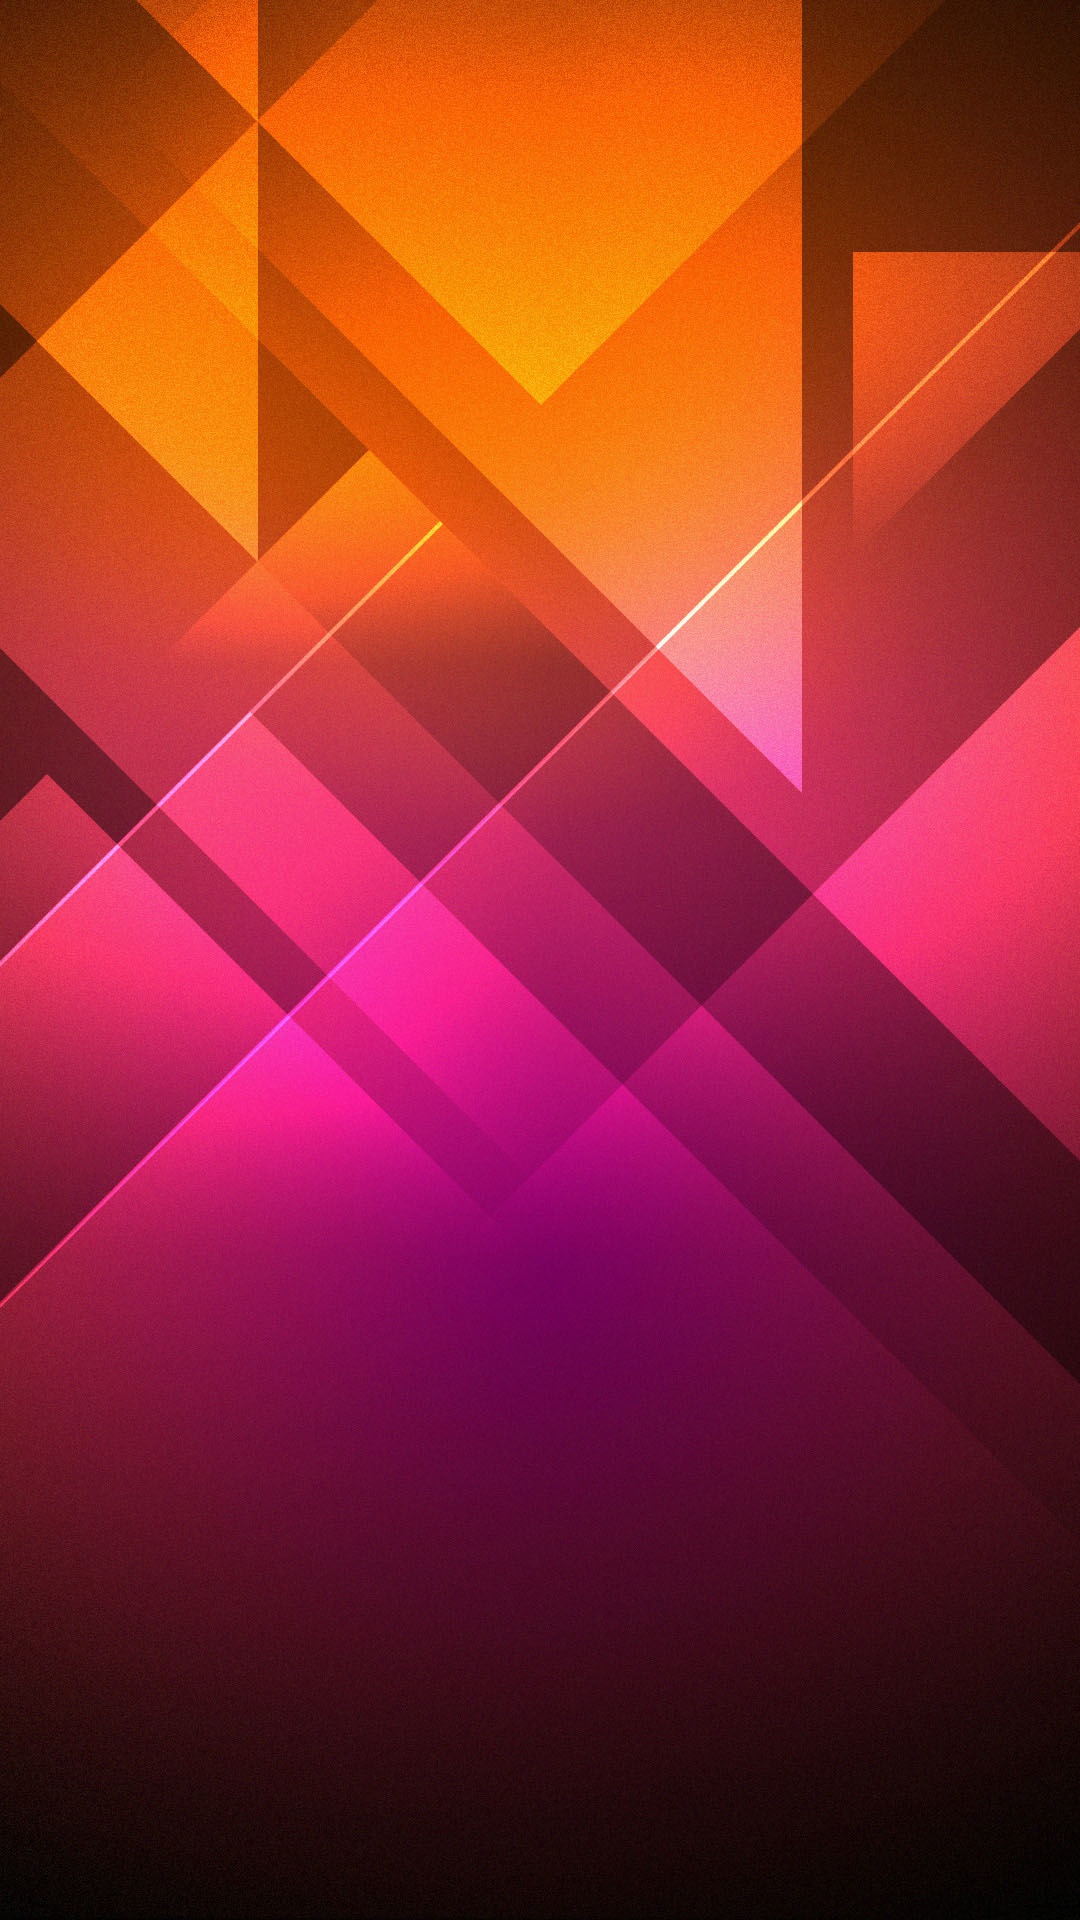 Abstract Pink Orange Triangles Android Wallpaper